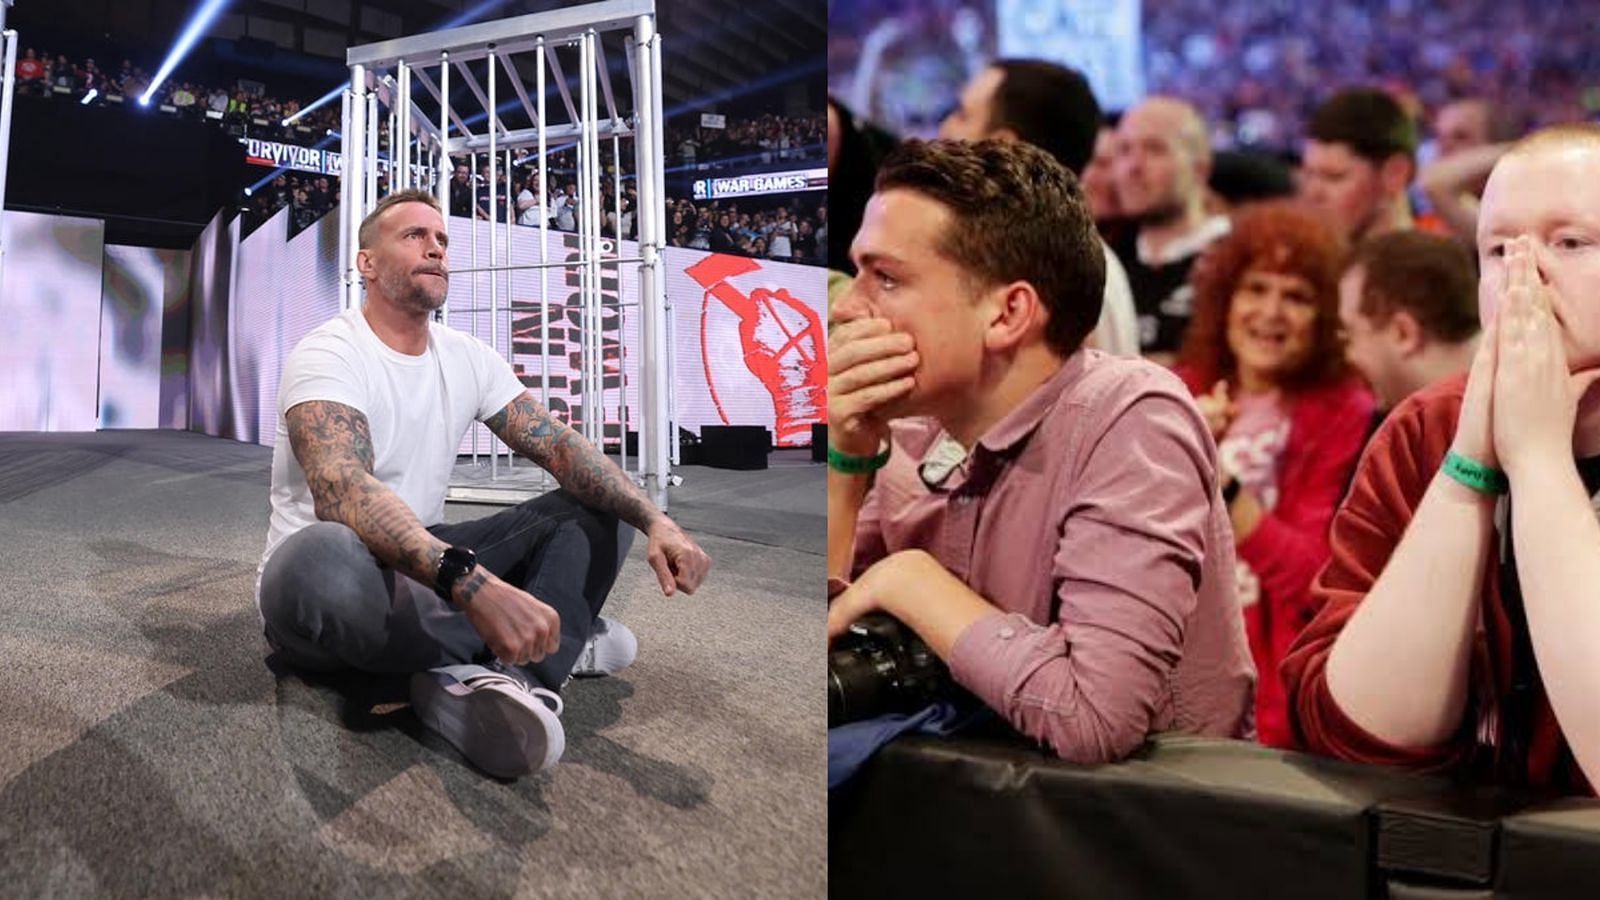 CM Punk returned to action at Royal Rumble!